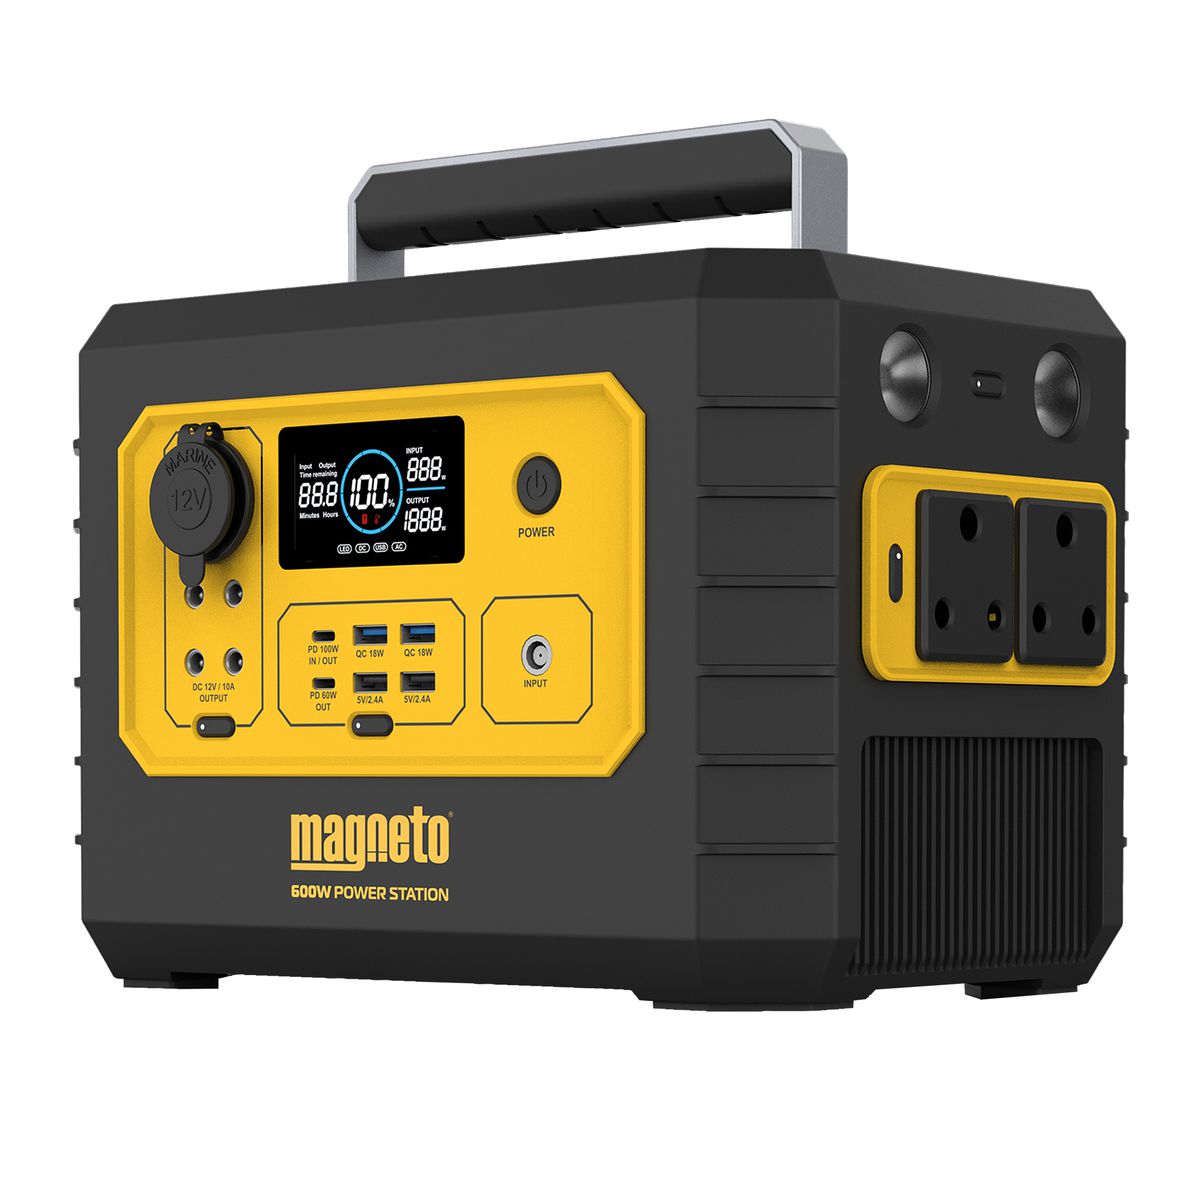 Magneto 600W (537Wh) Portable Power Backup Station with LiFePO4 battery